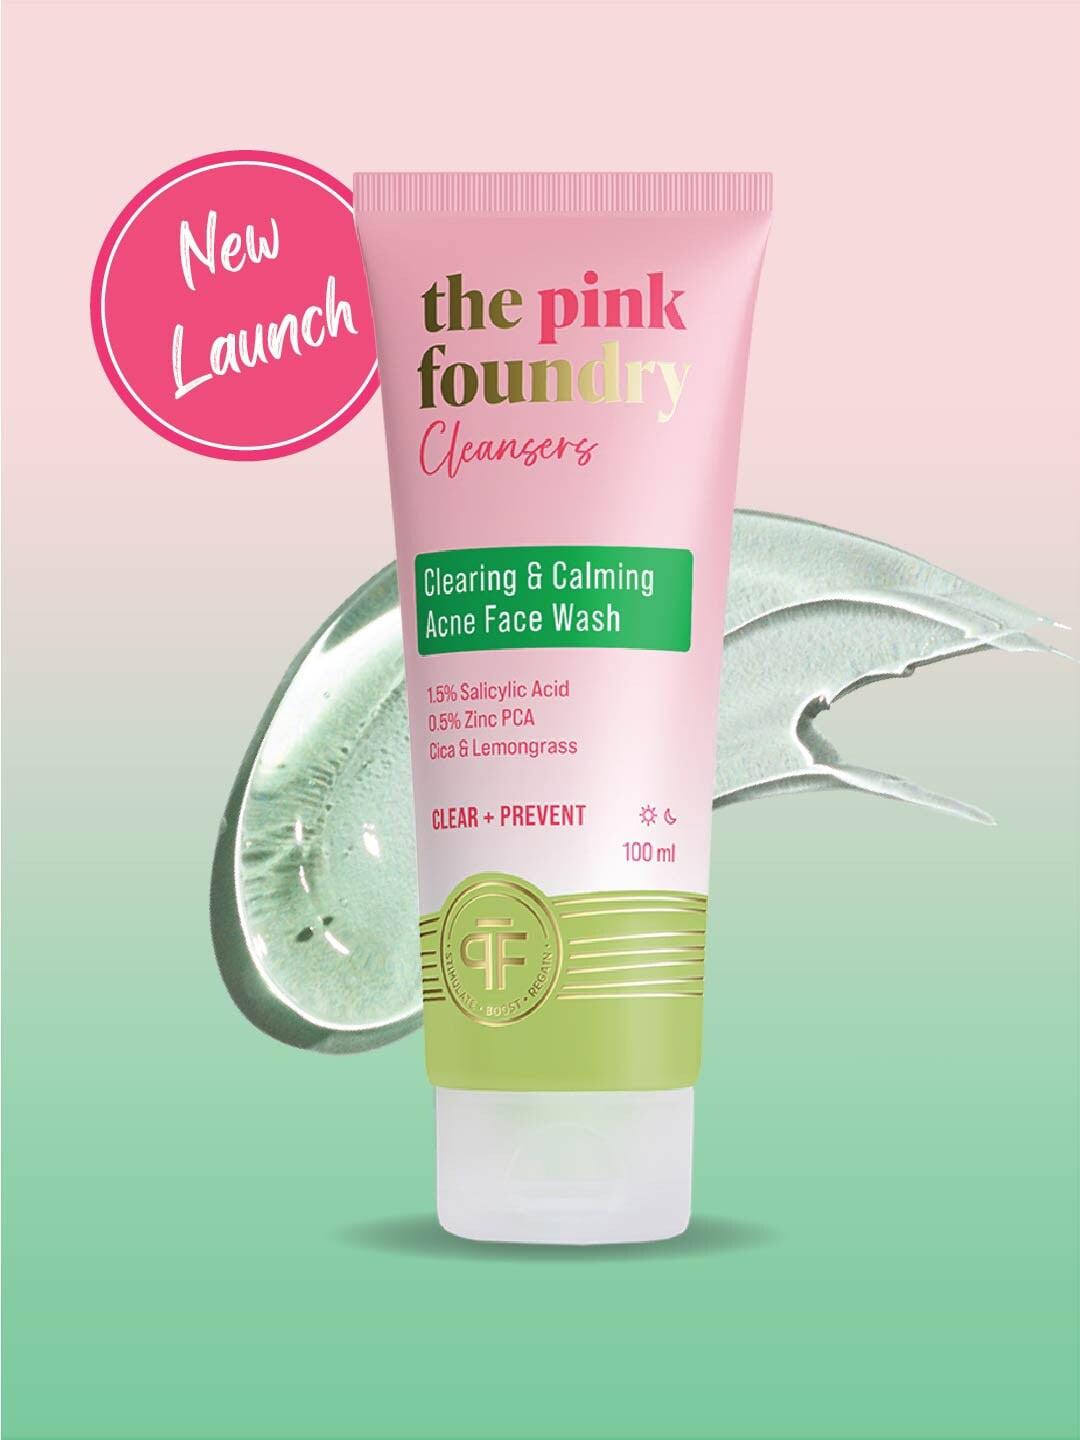 The Pink Foundry Cleansers Clearing & Calming Acne Face Wash - 100ml